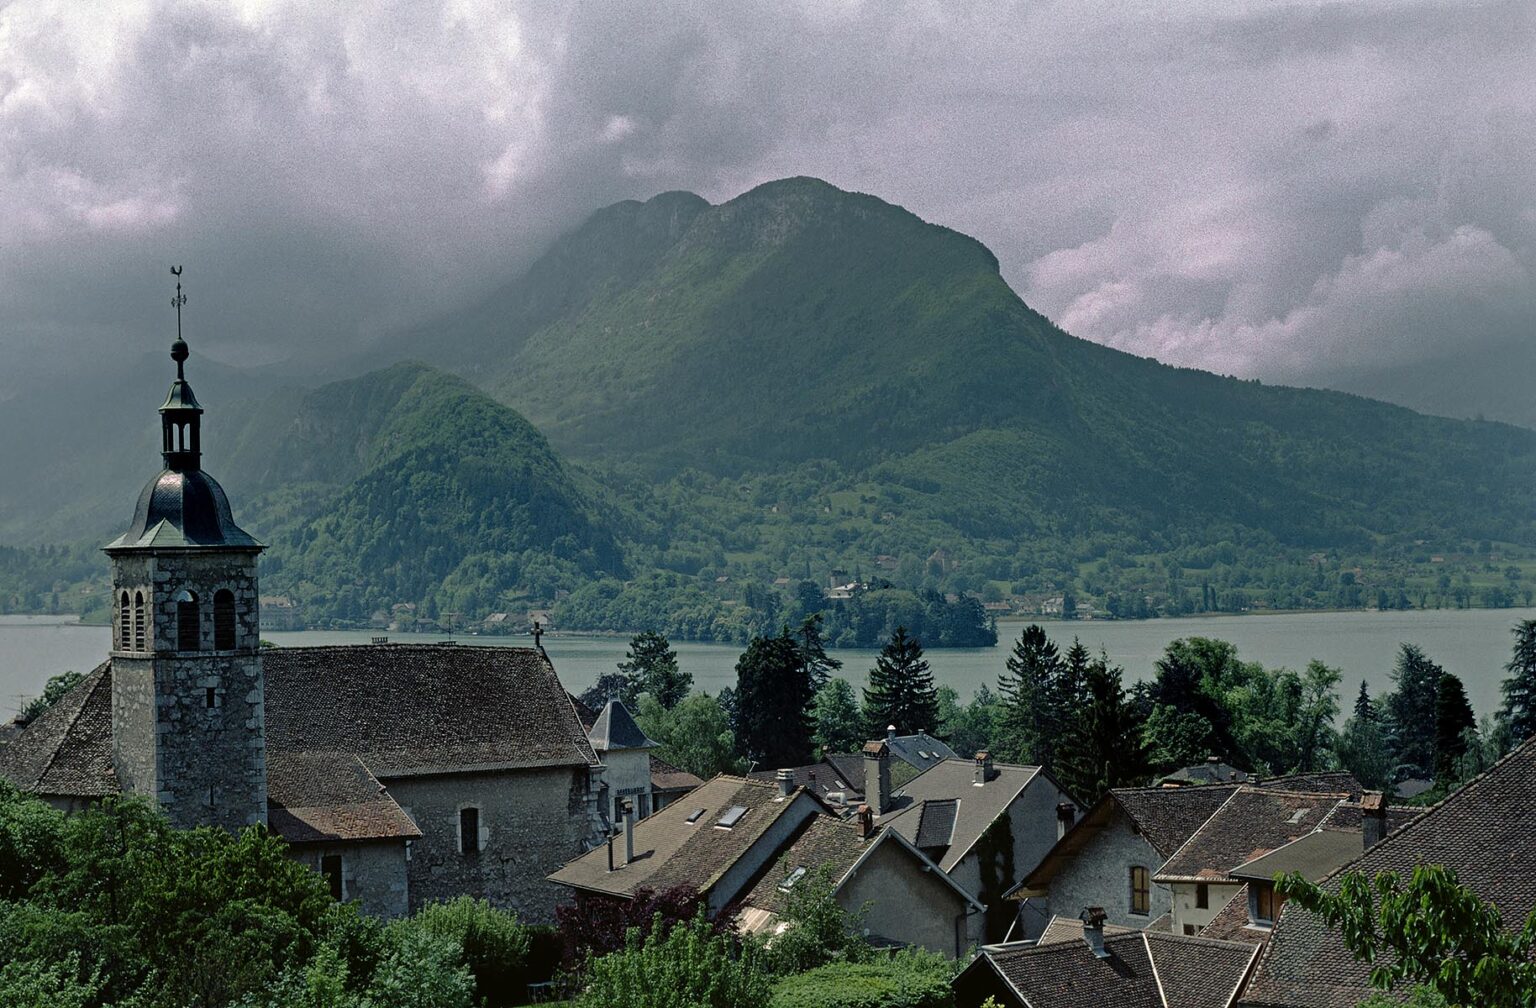 TOWN of TOLLORIES WITH CHURCH STEEPLE  on LAKE ANNECY with WHITE CLOUDS - ALPS REGION, FRANCE